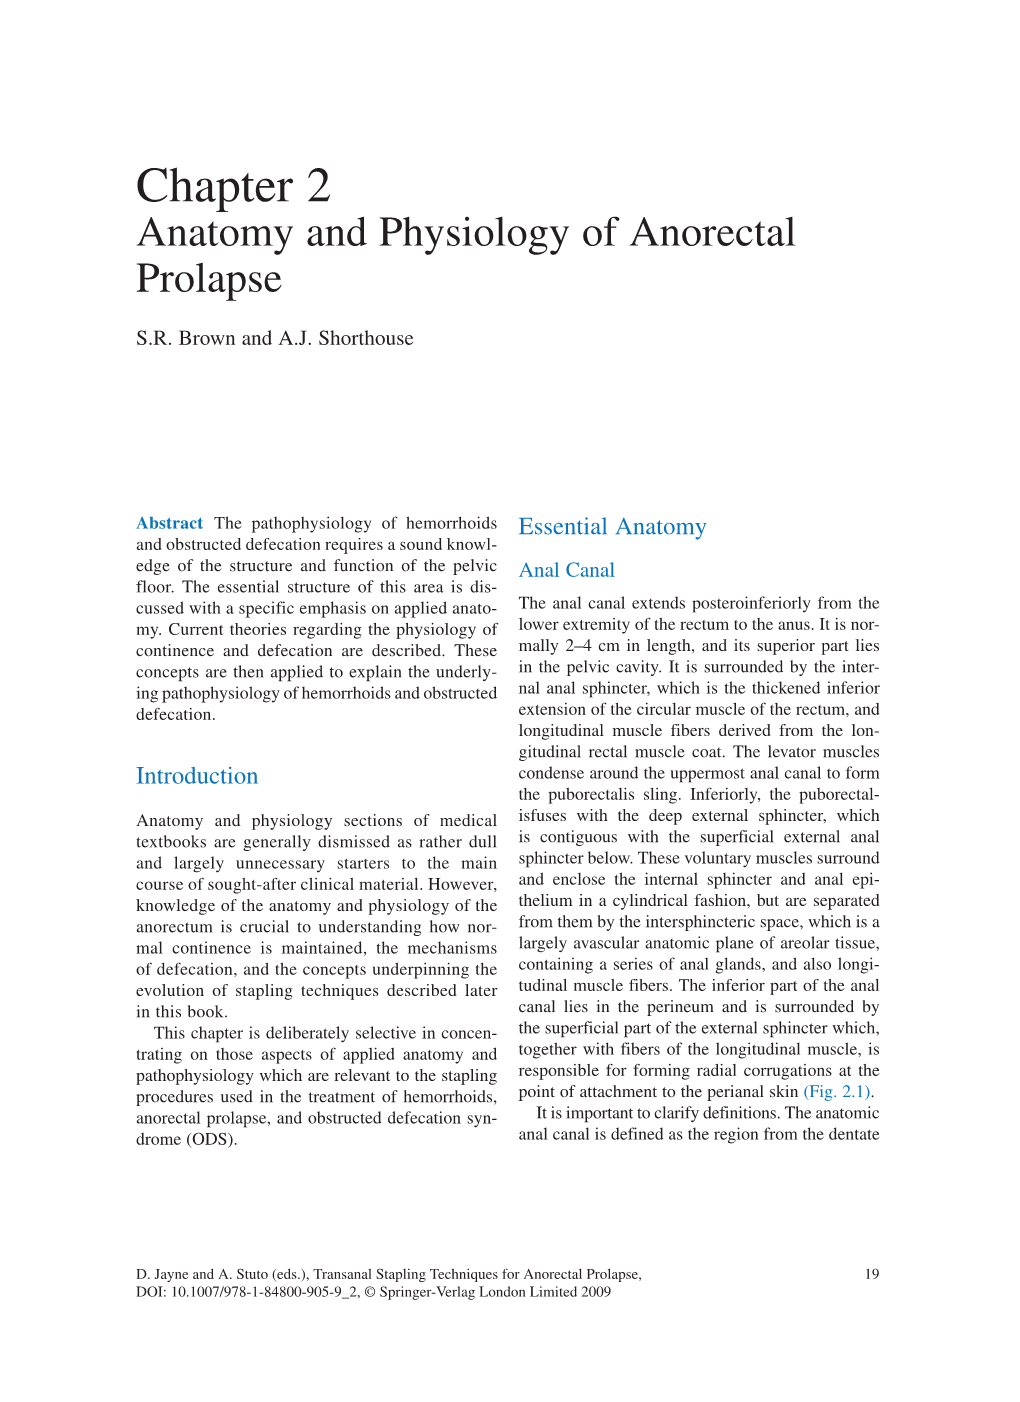 Chapter 2 Anatomy and Physiology of Anorectal Prolapse